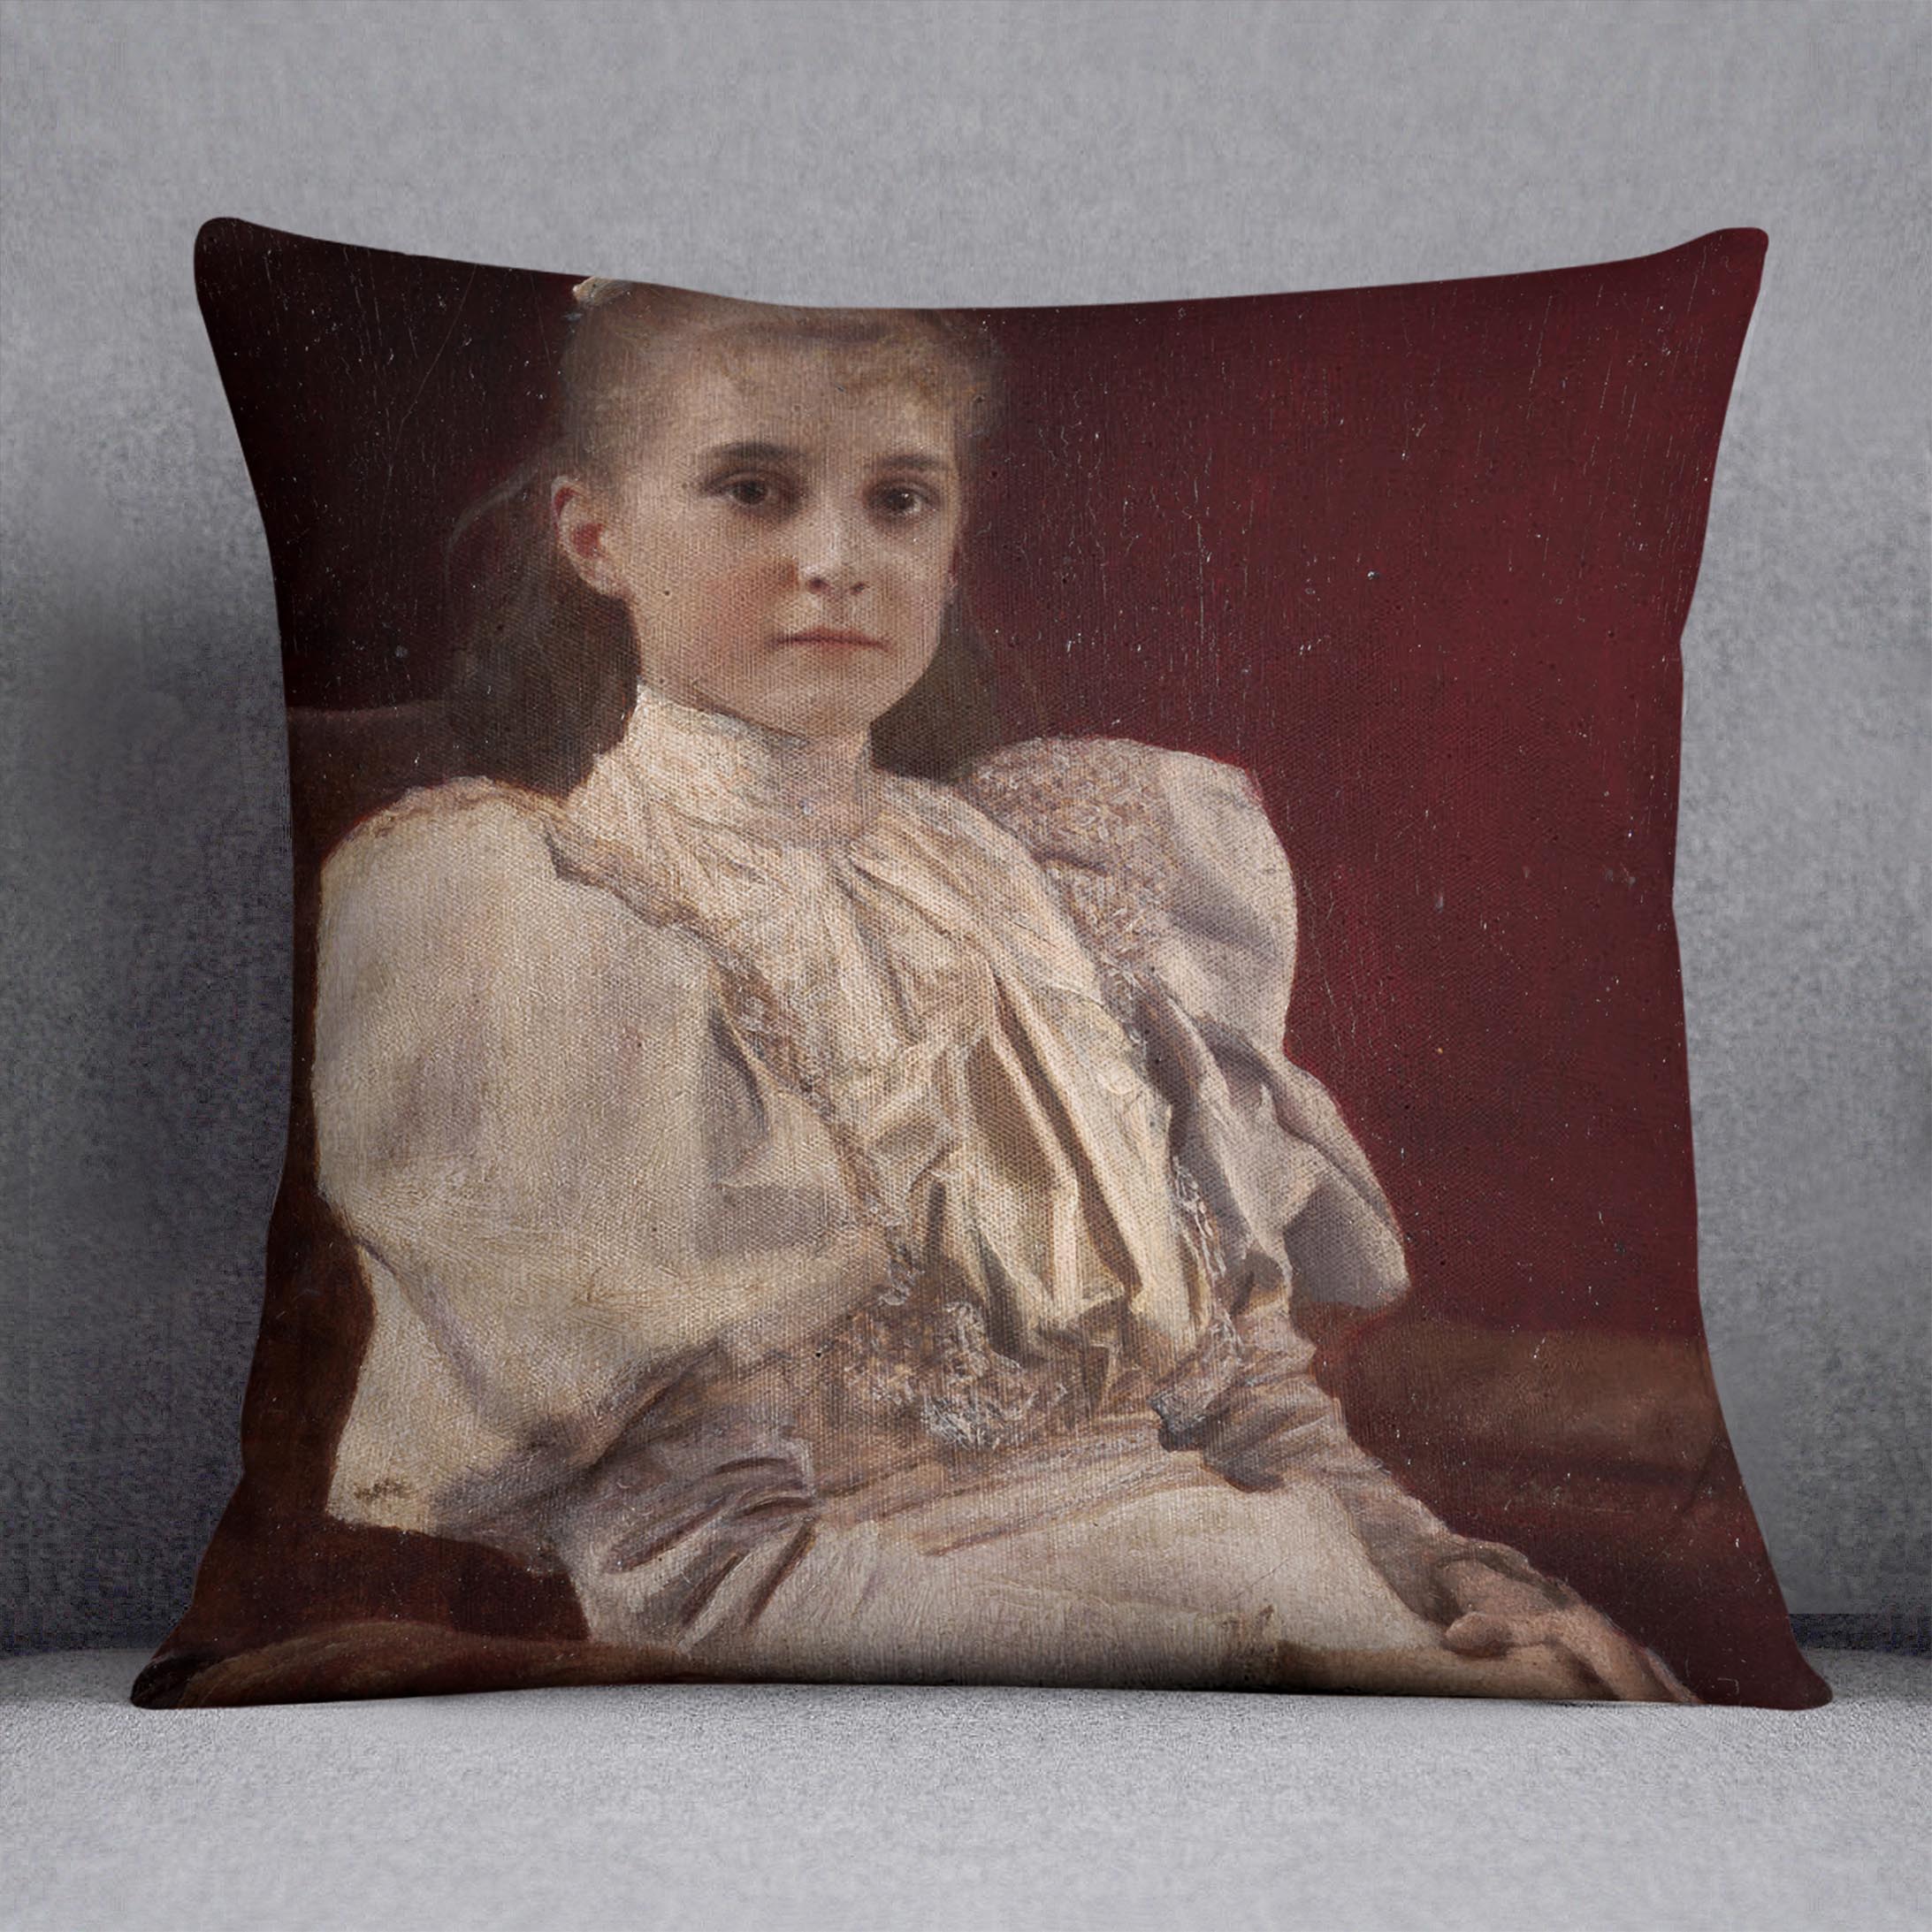 Seated Young Girl by Klimt Cushion